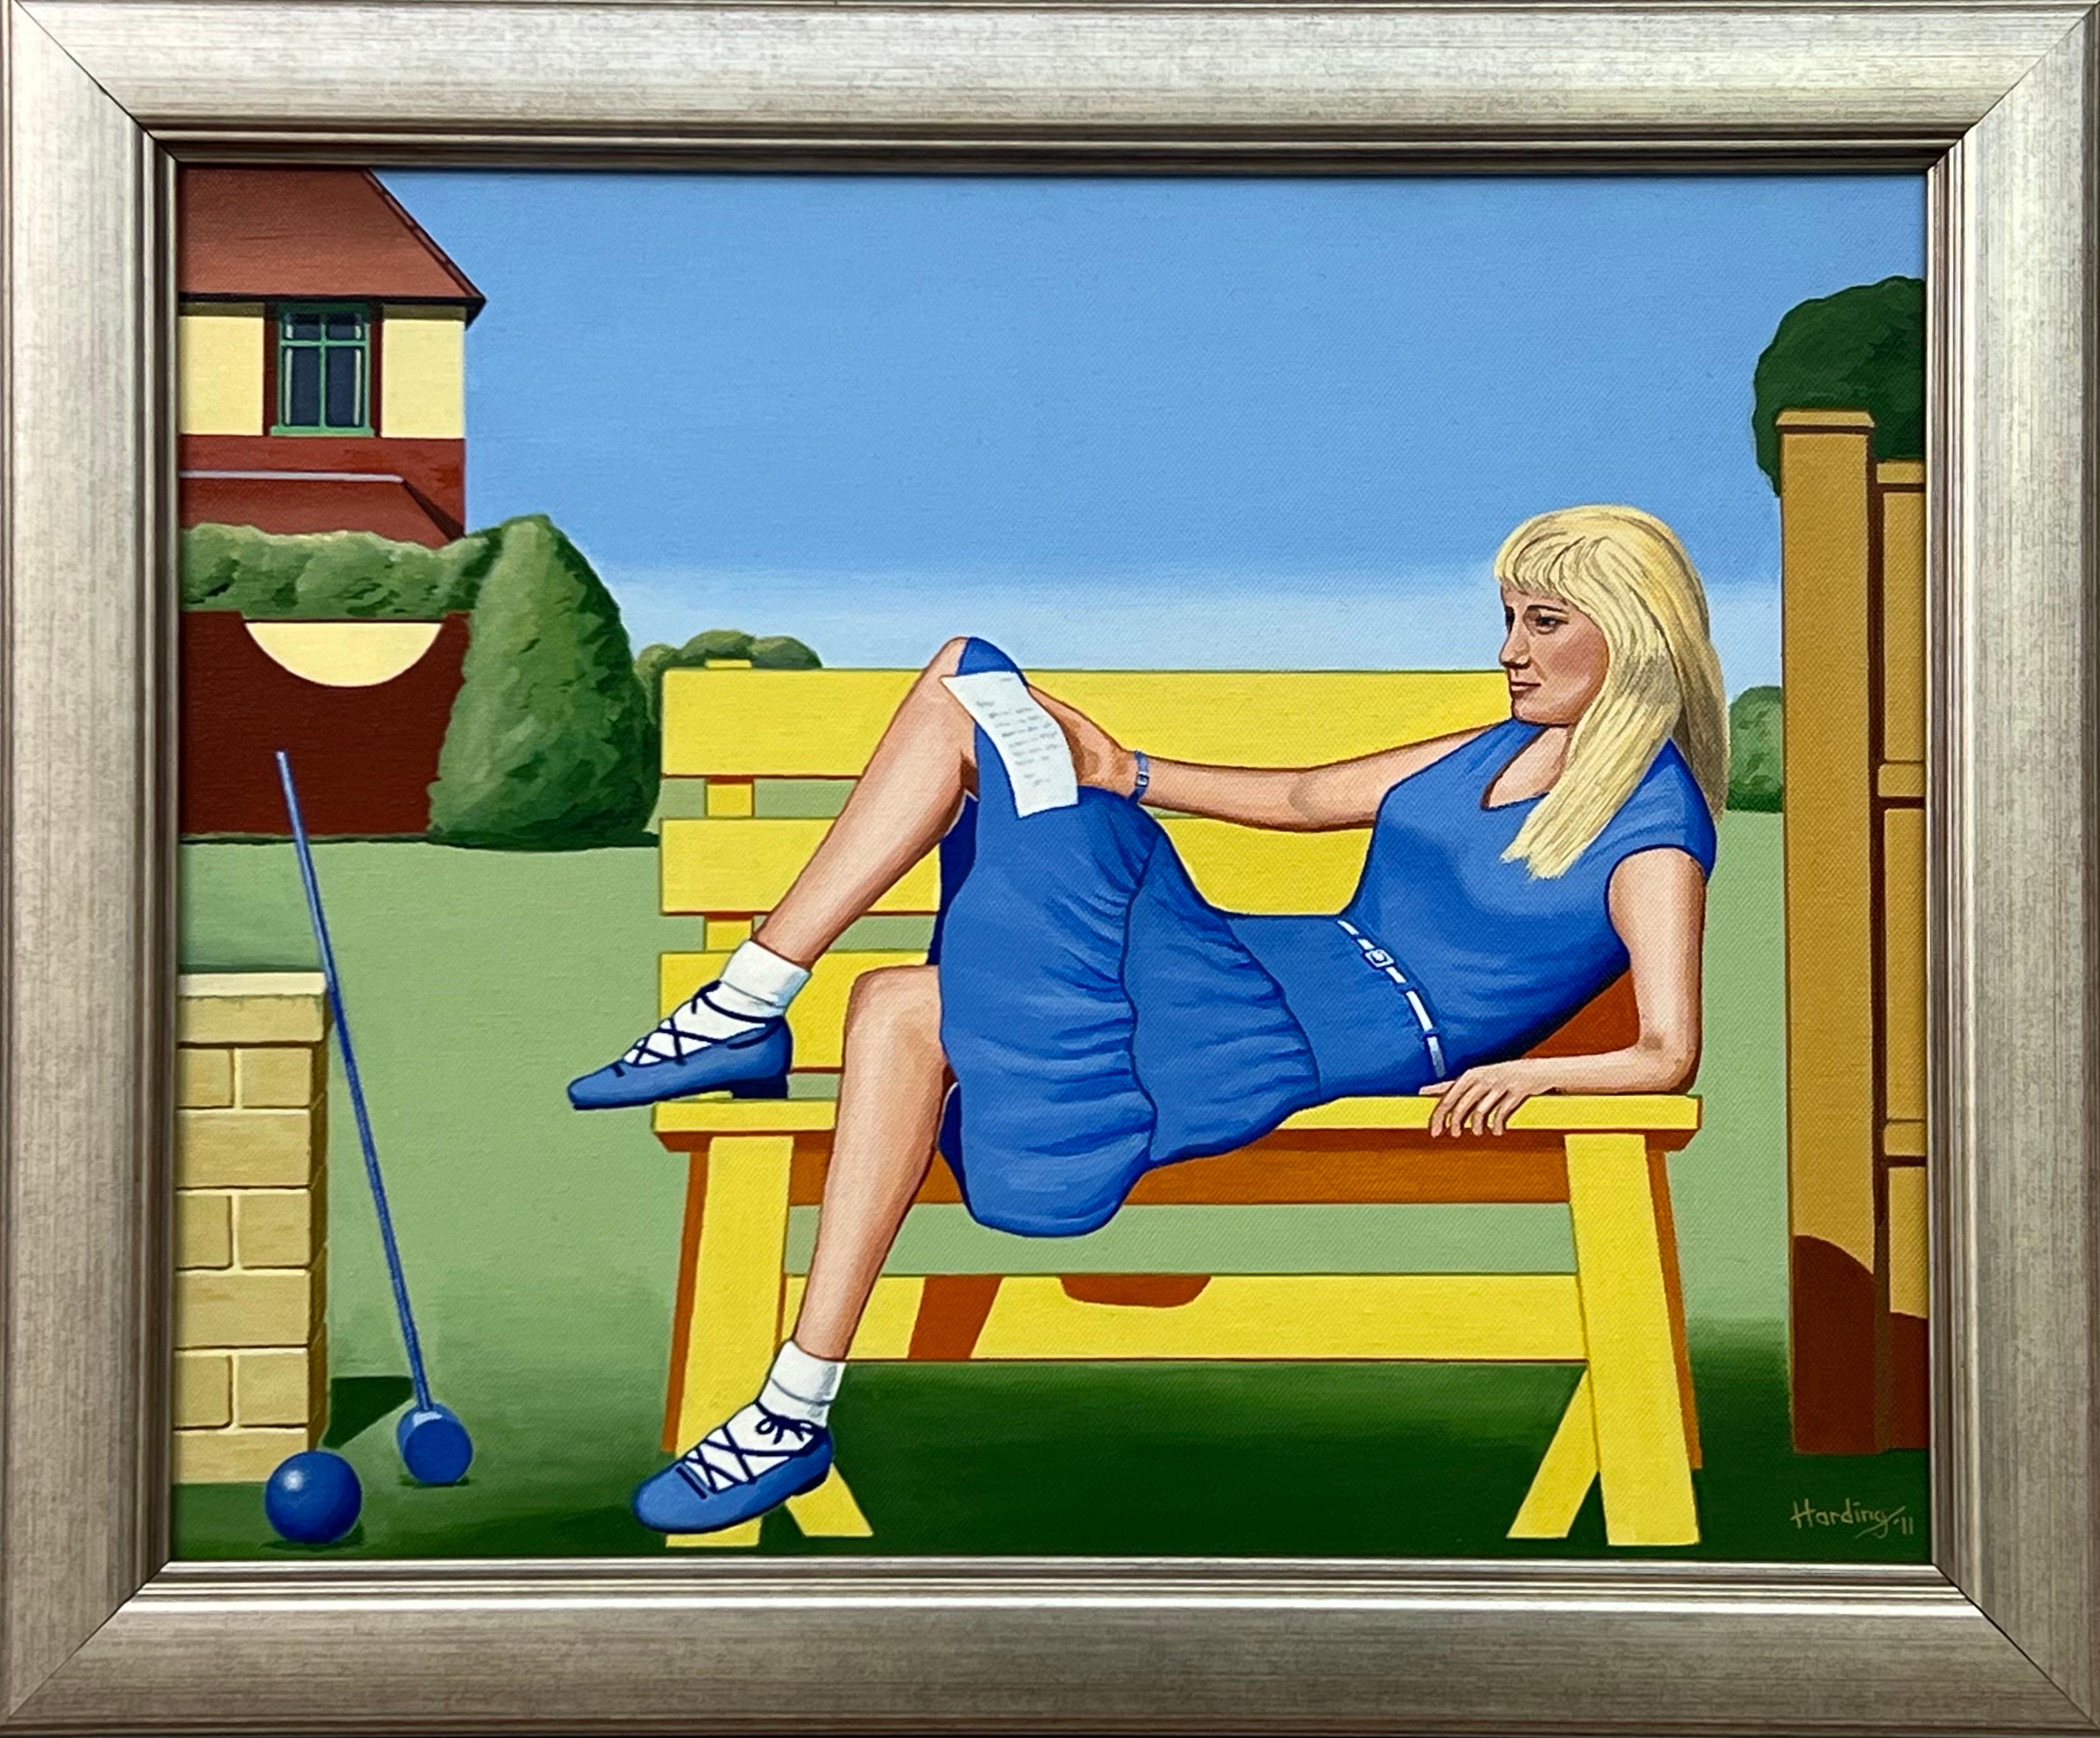 Paul F Harding Figurative Painting - Vintage English Woman in Dress on Park Bench in Suburbia 1960's 1970's England